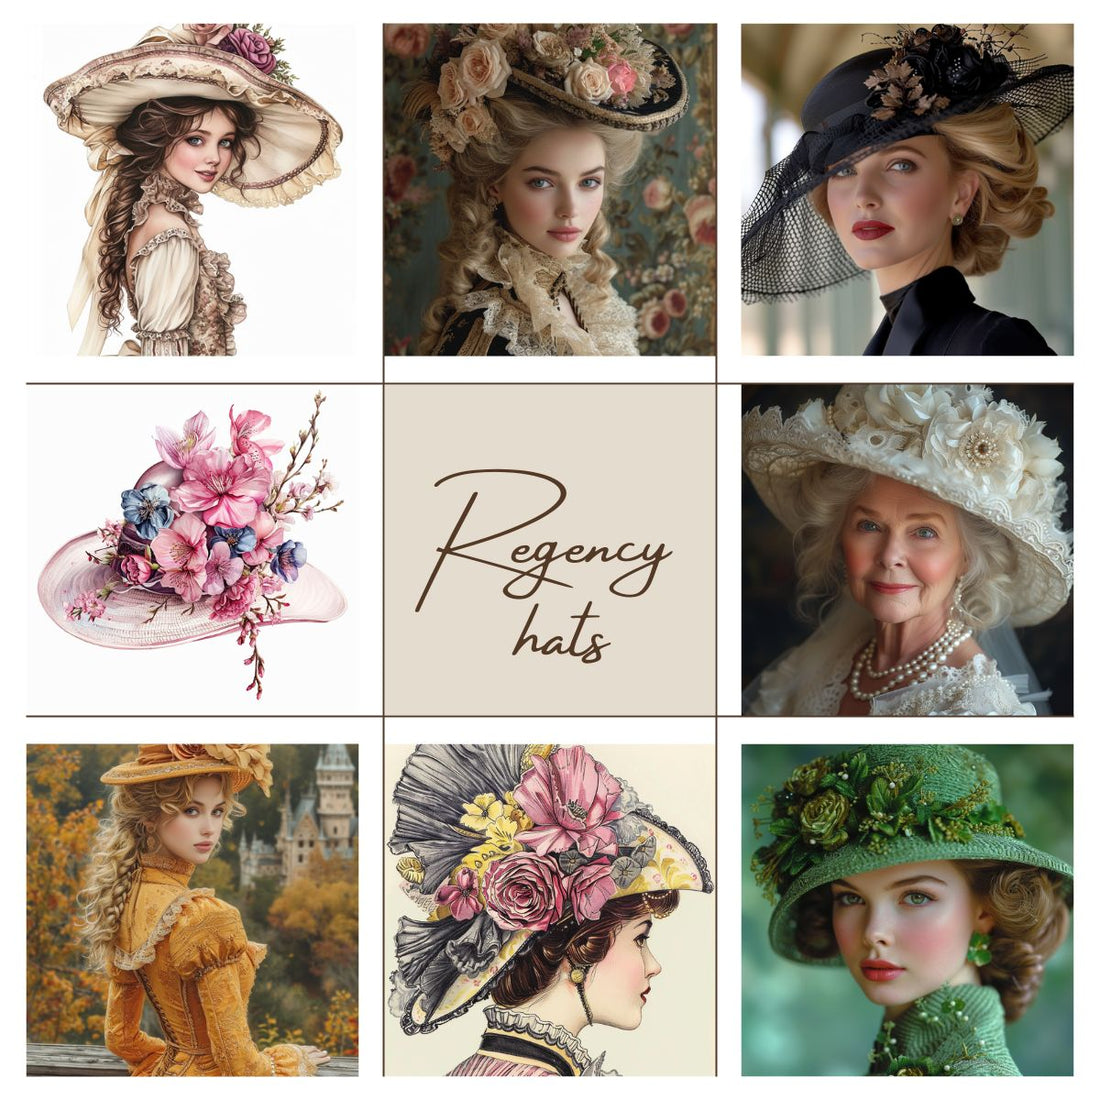 The Elegance and Tradition of Ladies' Hats at the Royal Ascot